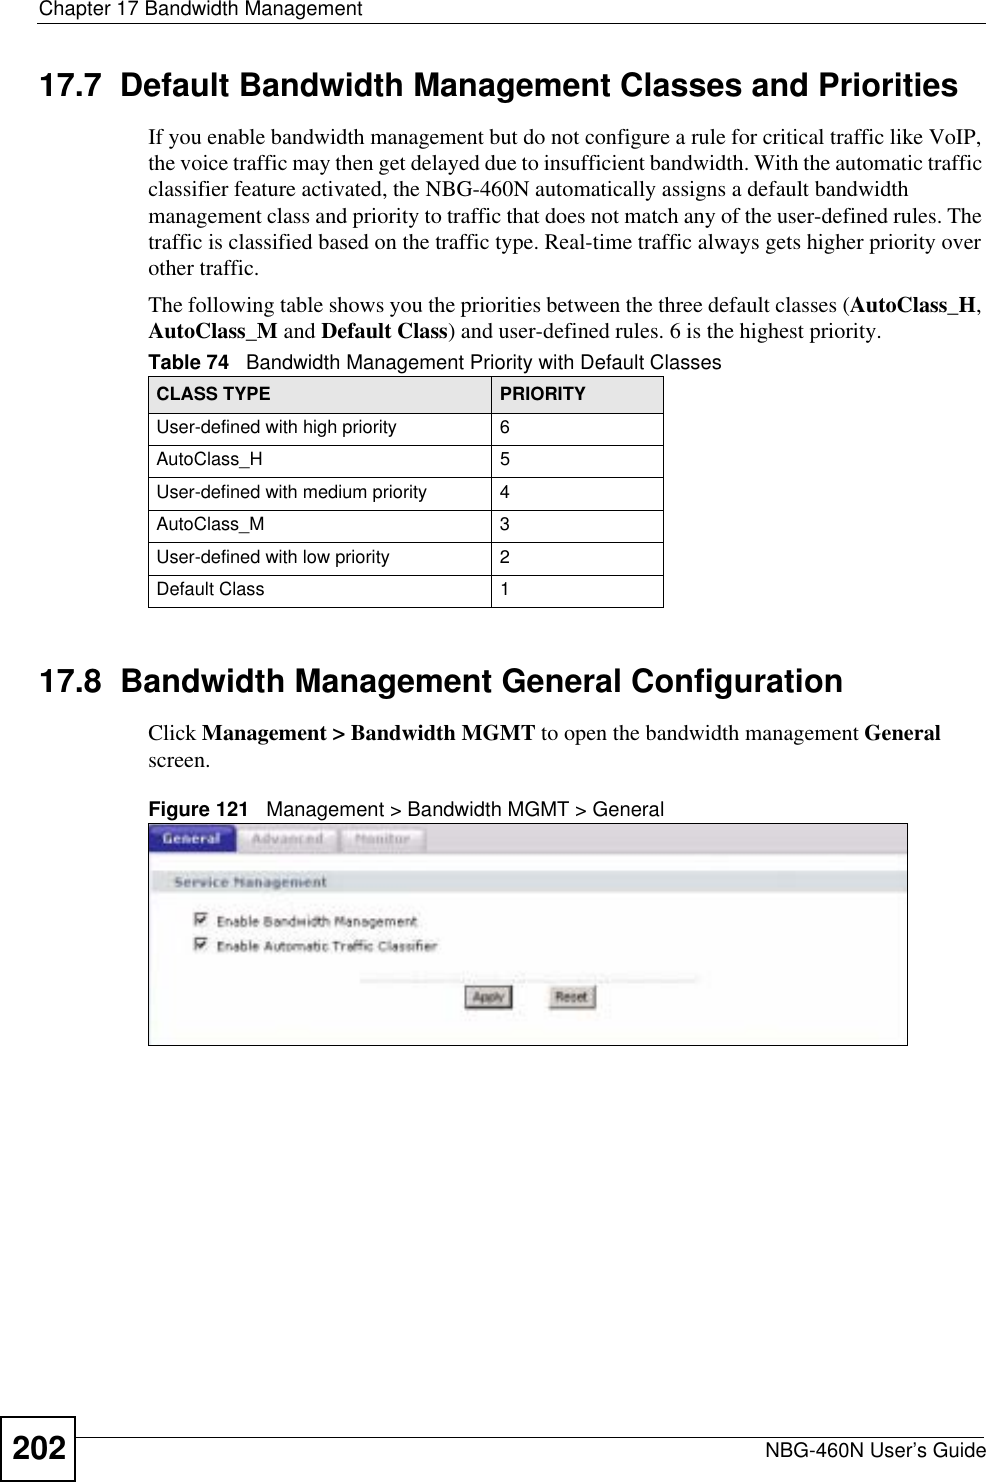 Chapter 17 Bandwidth ManagementNBG-460N User’s Guide20217.7  Default Bandwidth Management Classes and PrioritiesIf you enable bandwidth management but do not configure a rule for critical traffic like VoIP, the voice traffic may then get delayed due to insufficient bandwidth. With the automatic traffic classifier feature activated, the NBG-460N automatically assigns a default bandwidth management class and priority to traffic that does not match any of the user-defined rules. The traffic is classified based on the traffic type. Real-time traffic always gets higher priority over other traffic. The following table shows you the priorities between the three default classes (AutoClass_H,AutoClass_M and Default Class) and user-defined rules. 6 is the highest priority.17.8  Bandwidth Management General Configuration Click Management &gt; Bandwidth MGMT to open the bandwidth management Generalscreen.Figure 121   Management &gt; Bandwidth MGMT &gt; General   Table 74   Bandwidth Management Priority with Default ClassesCLASS TYPE PRIORITYUser-defined with high priority 6AutoClass_H 5User-defined with medium priority 4AutoClass_M 3User-defined with low priority 2Default Class 1